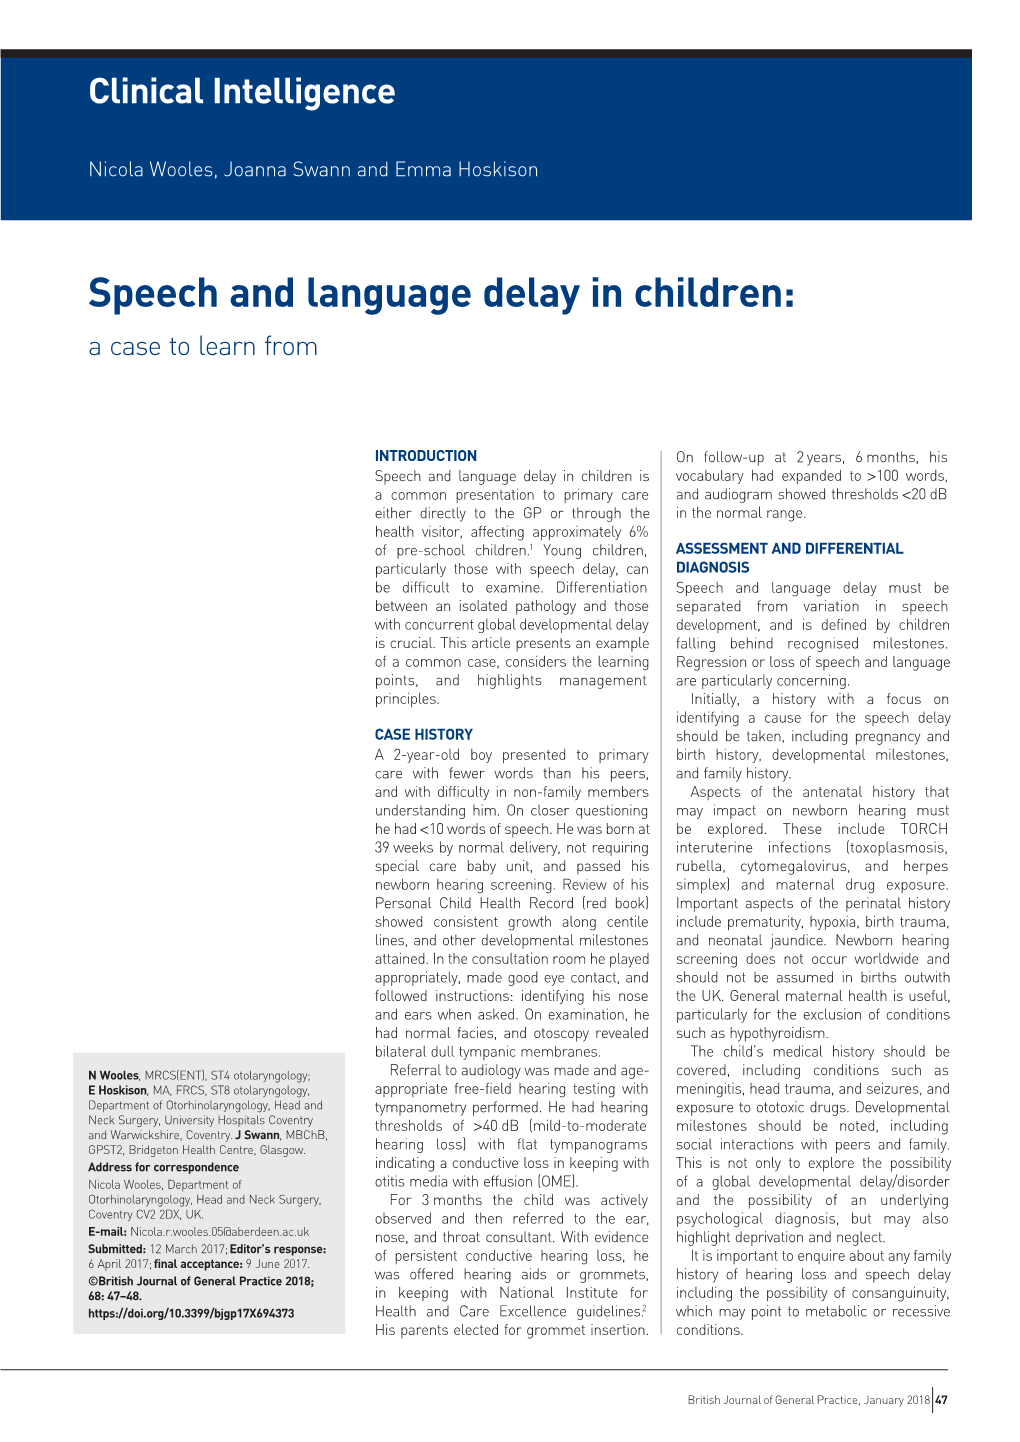 Speech and Language Delay in Children: a Case to Learn From